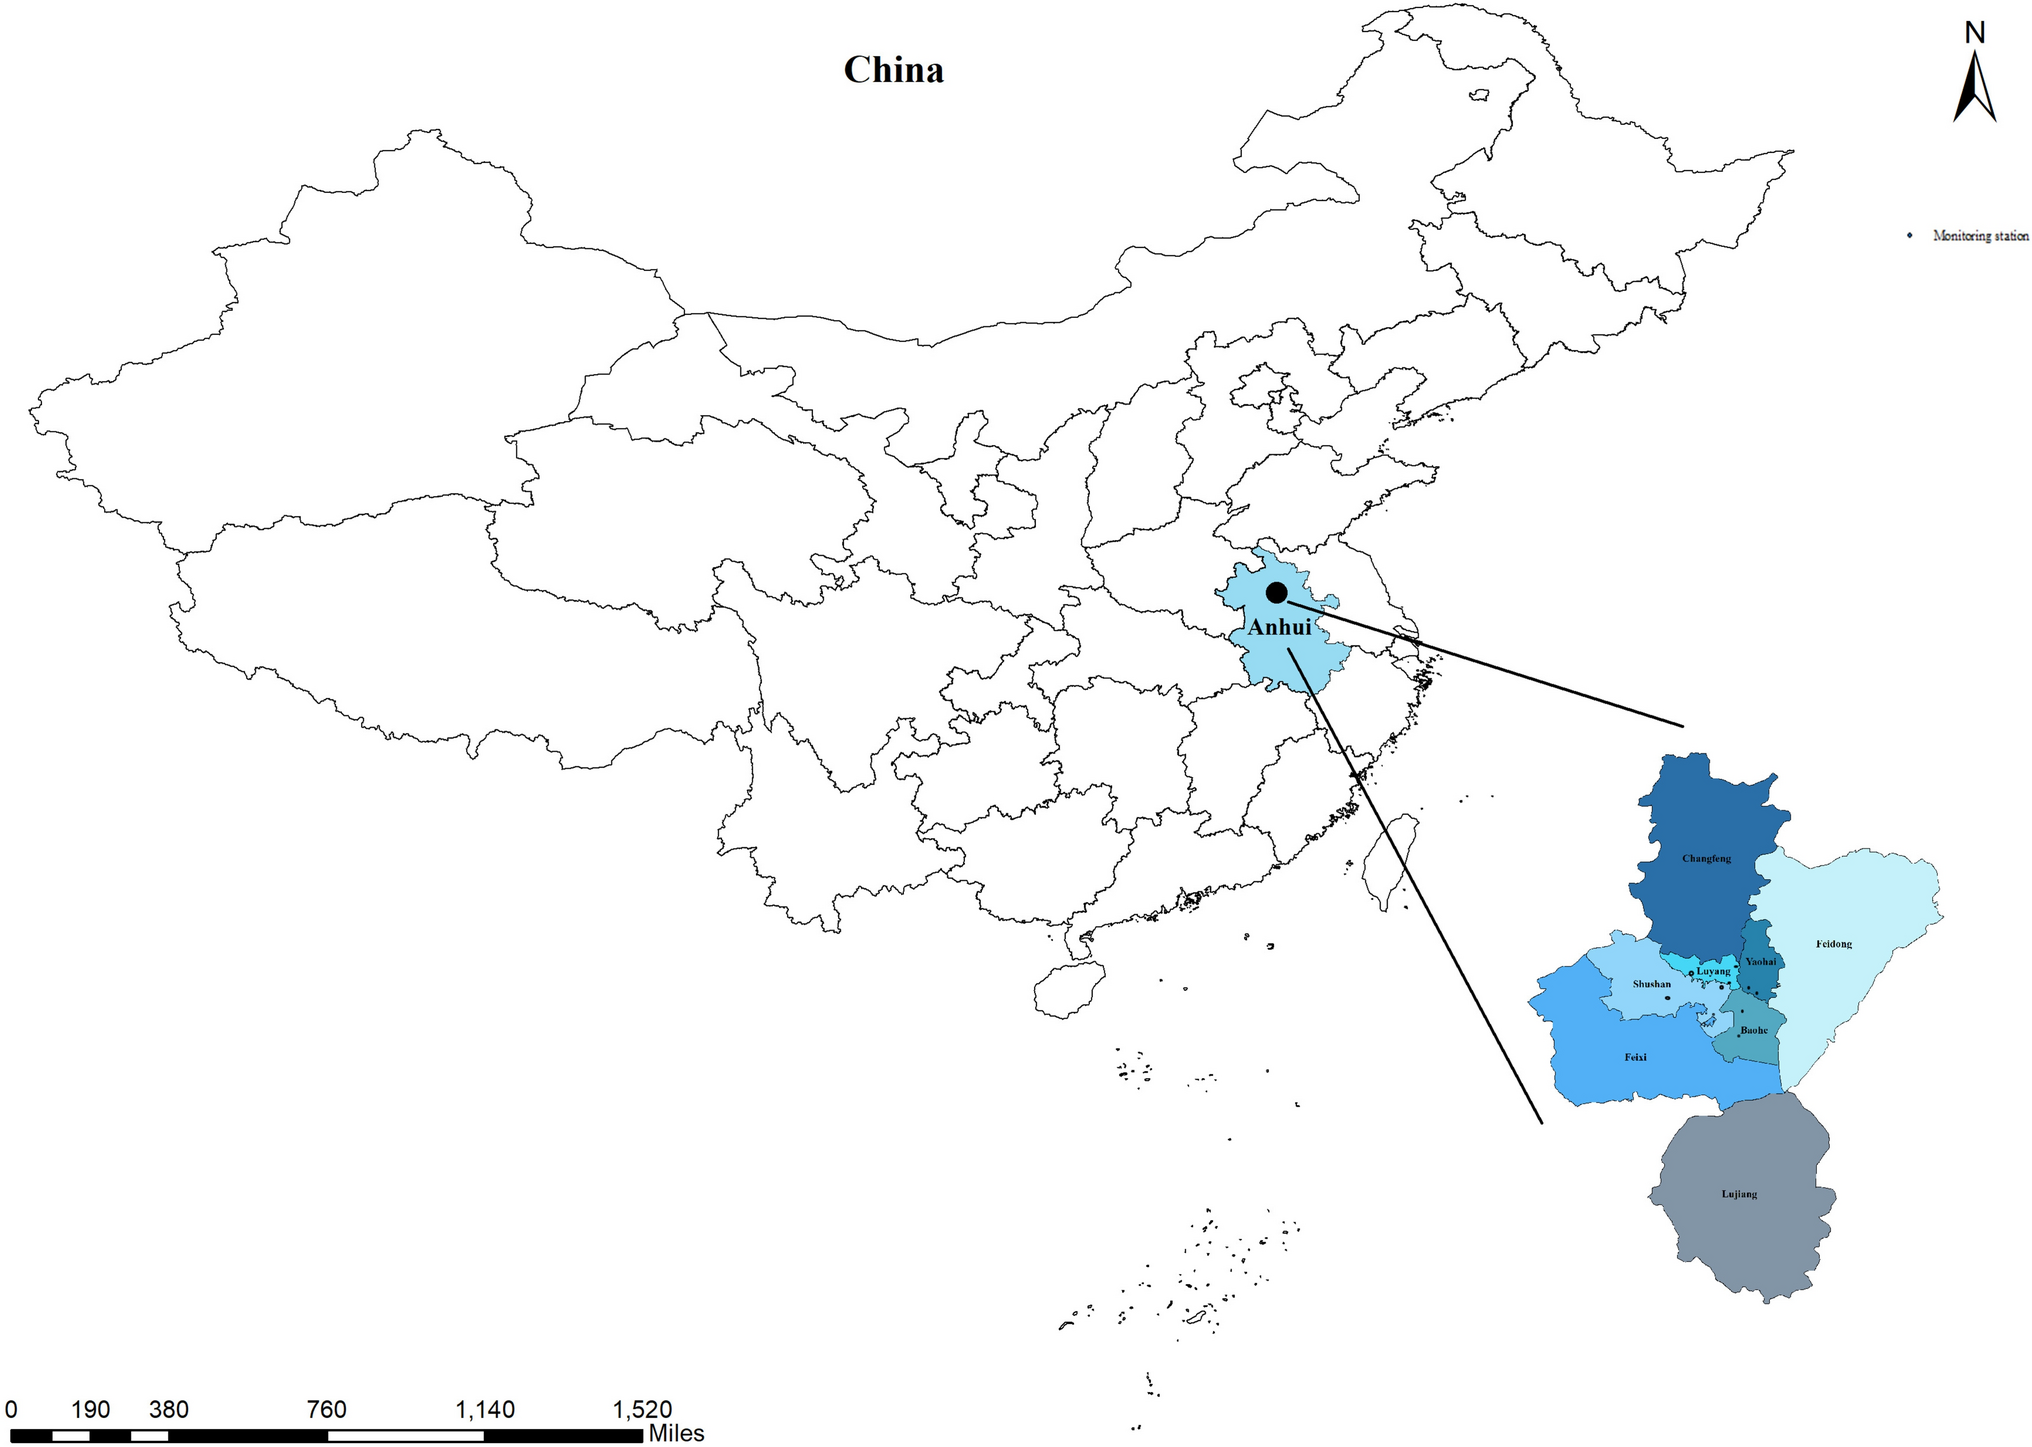 The impact of short-term exposure to meteorological factors on the risk of death from hypertension and its major complications: a time series analysis based on Hefei, China